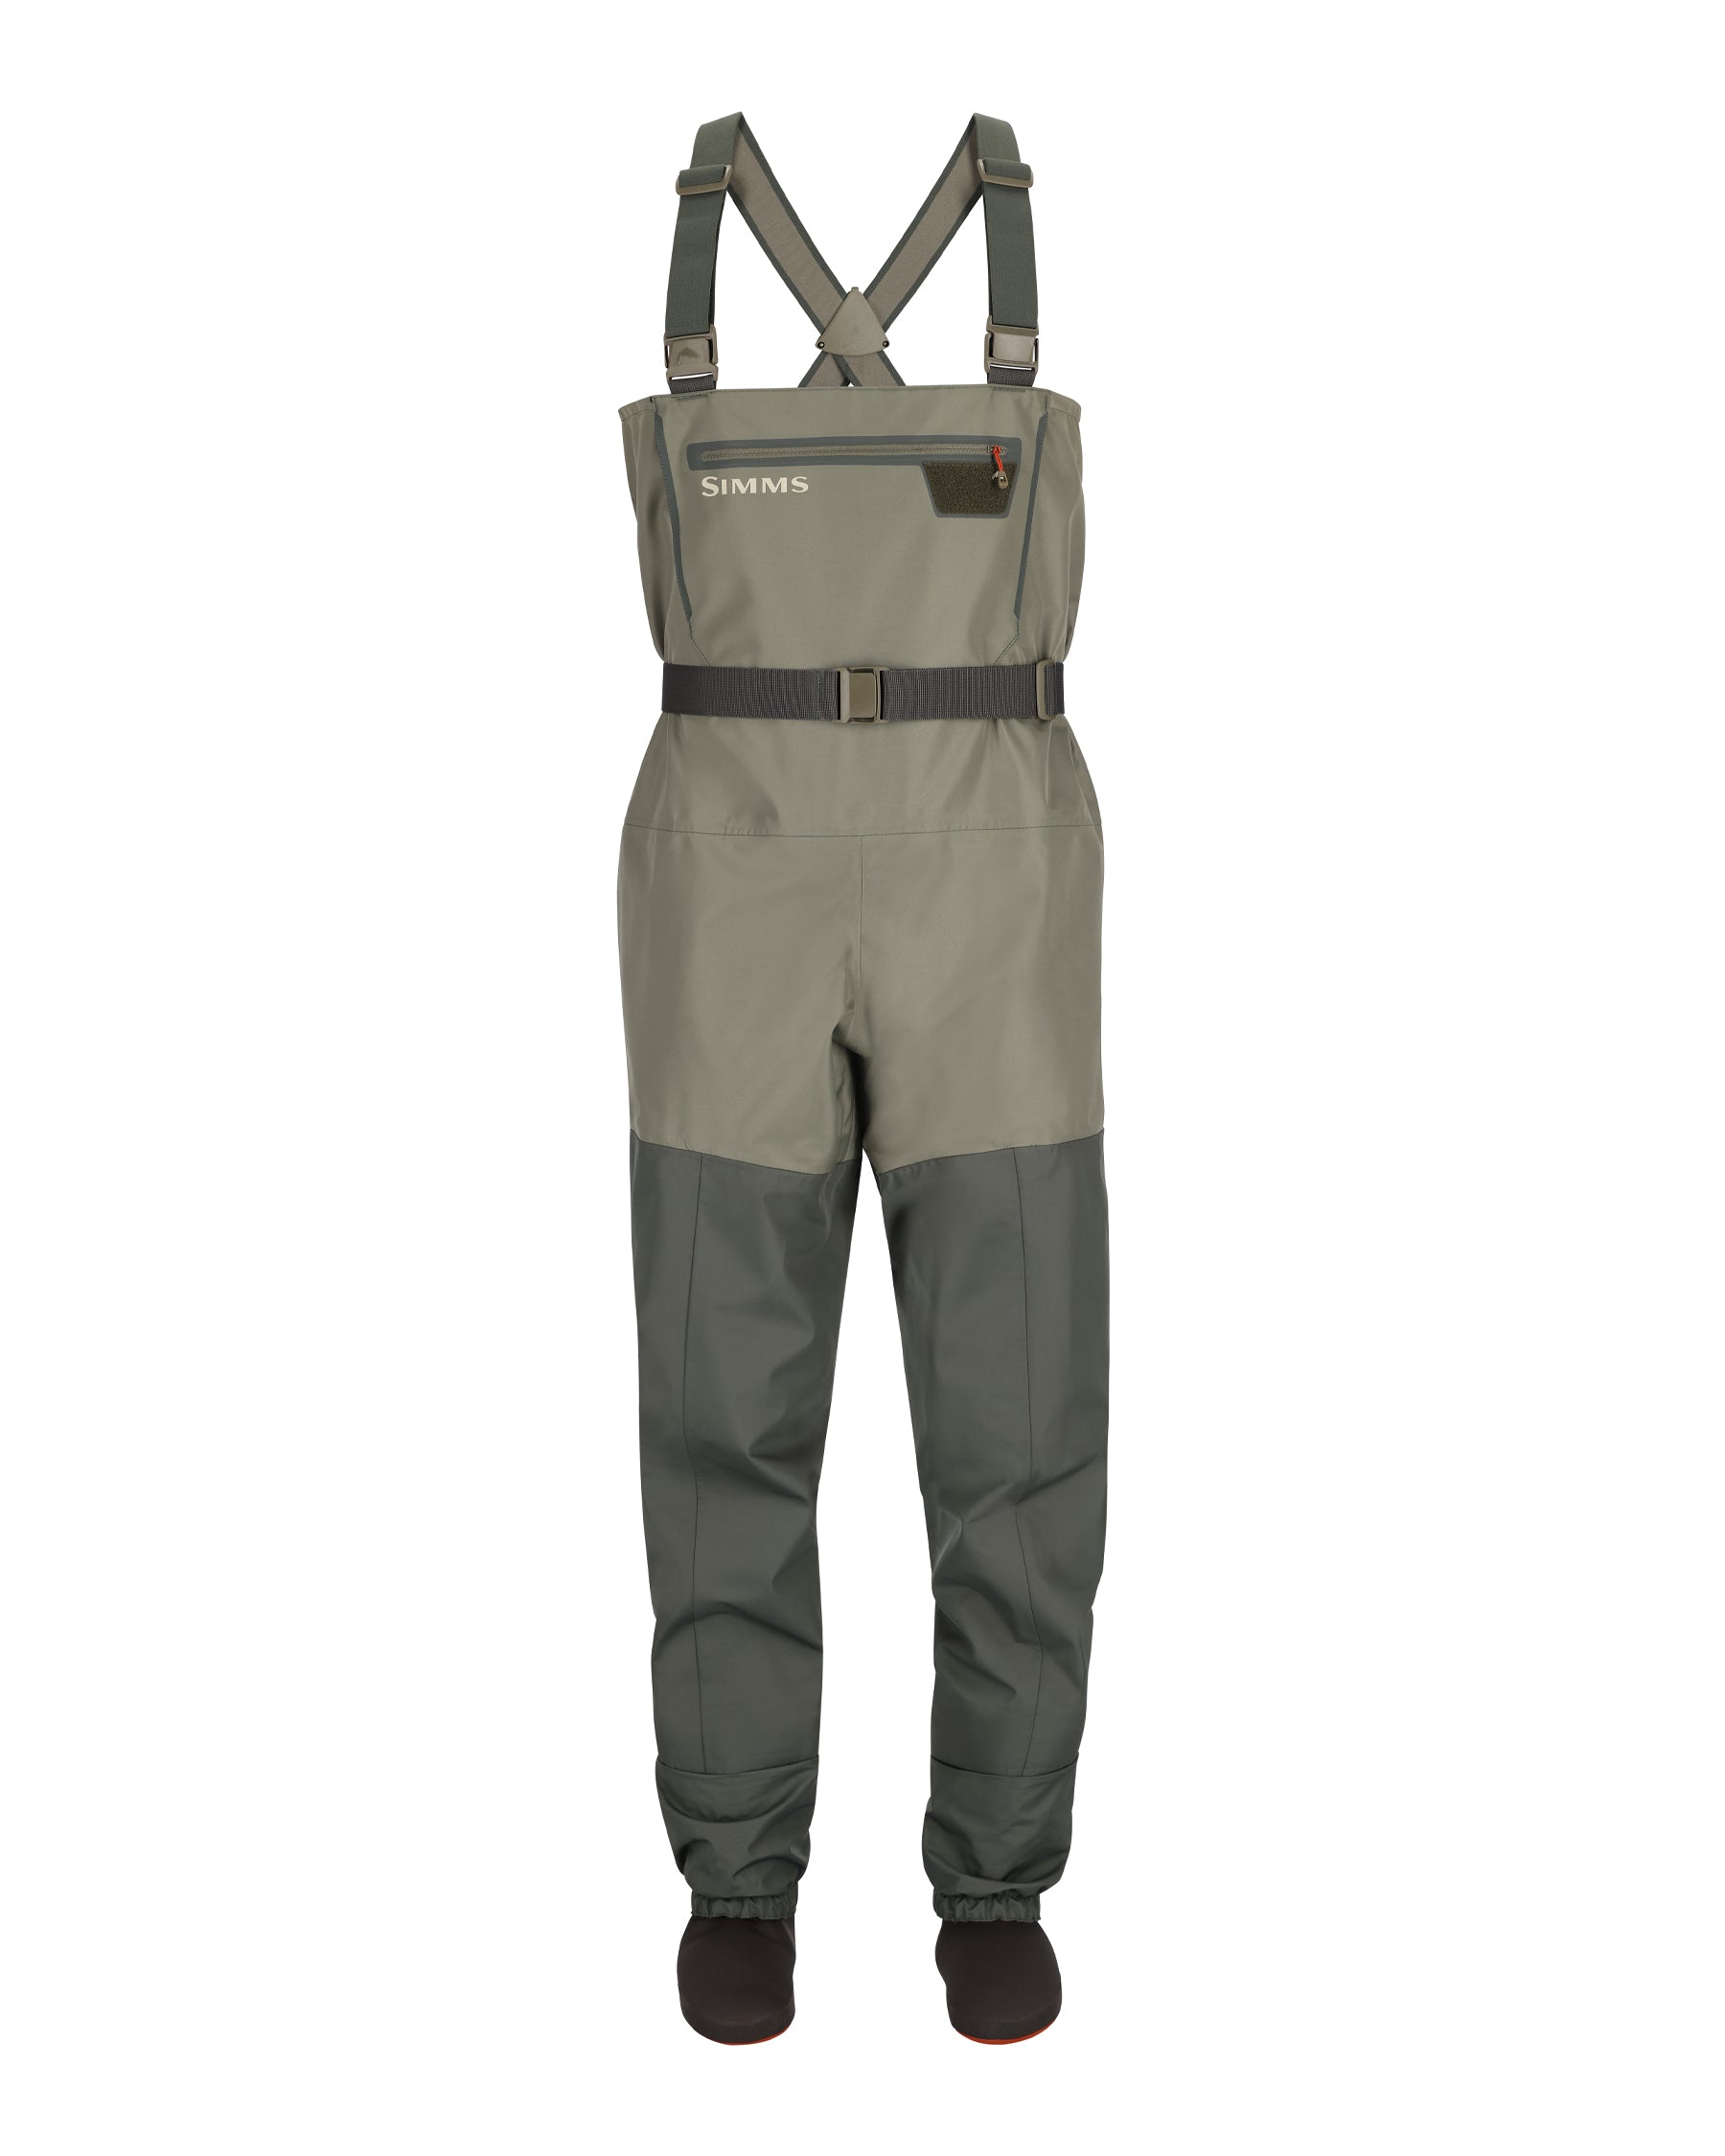 7 Breathable Chest Waders for Your Fly Fishing Comfort - Guide Recommended